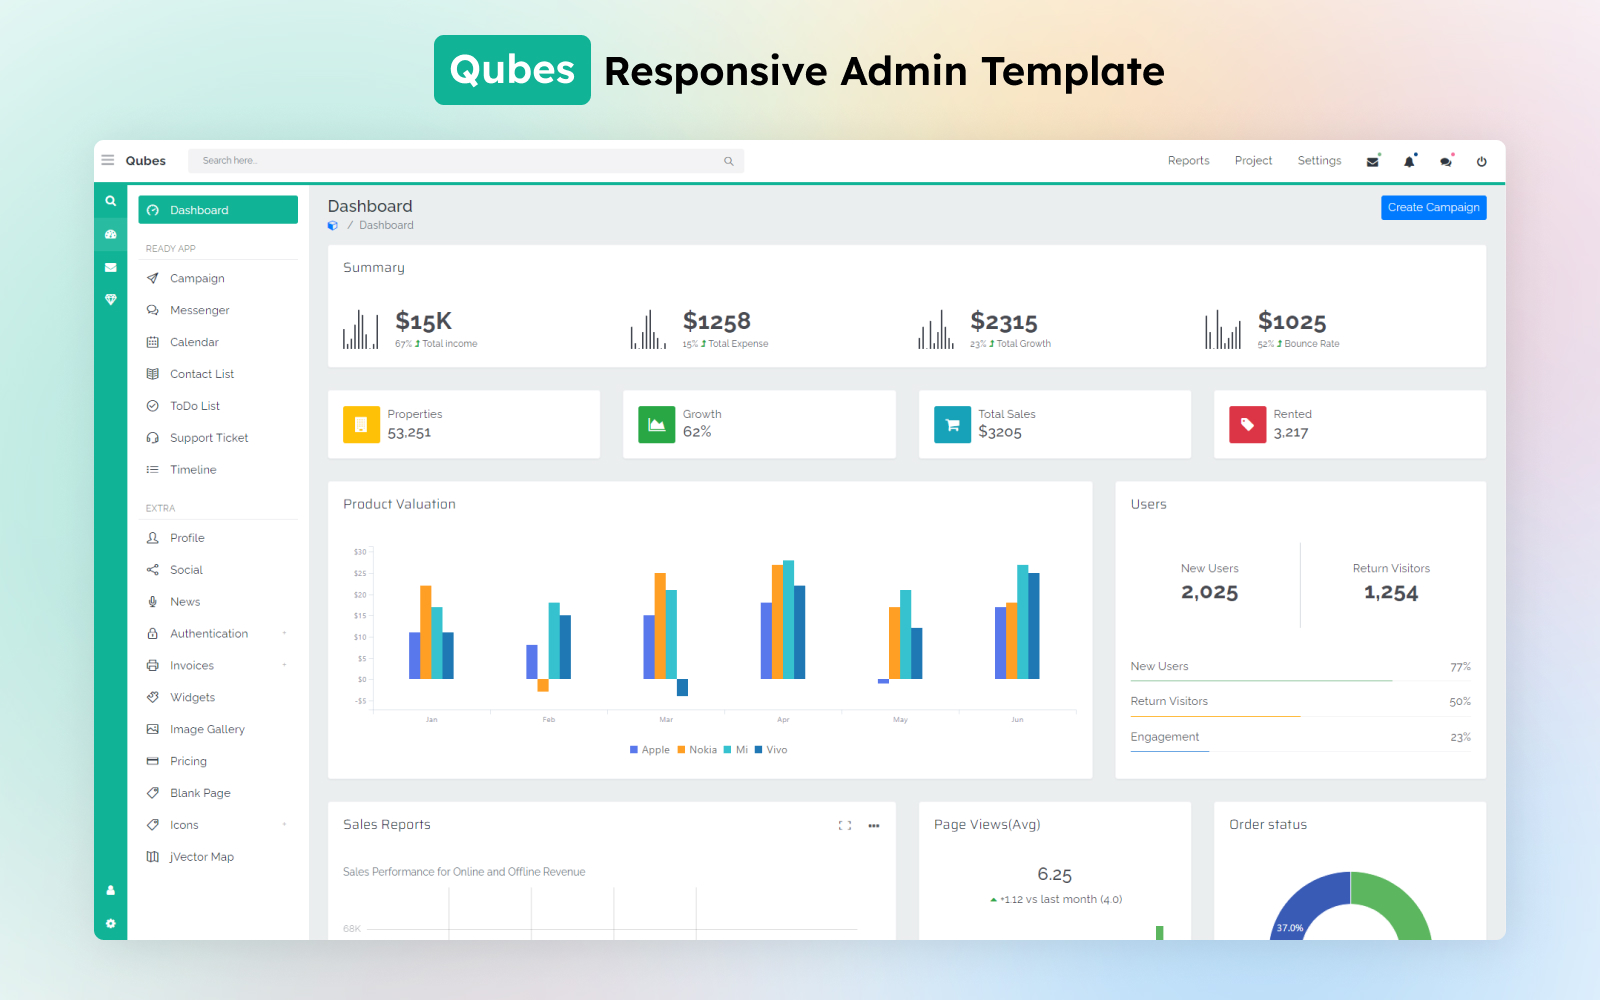 QUBES - A Simple Admin Template with ALL